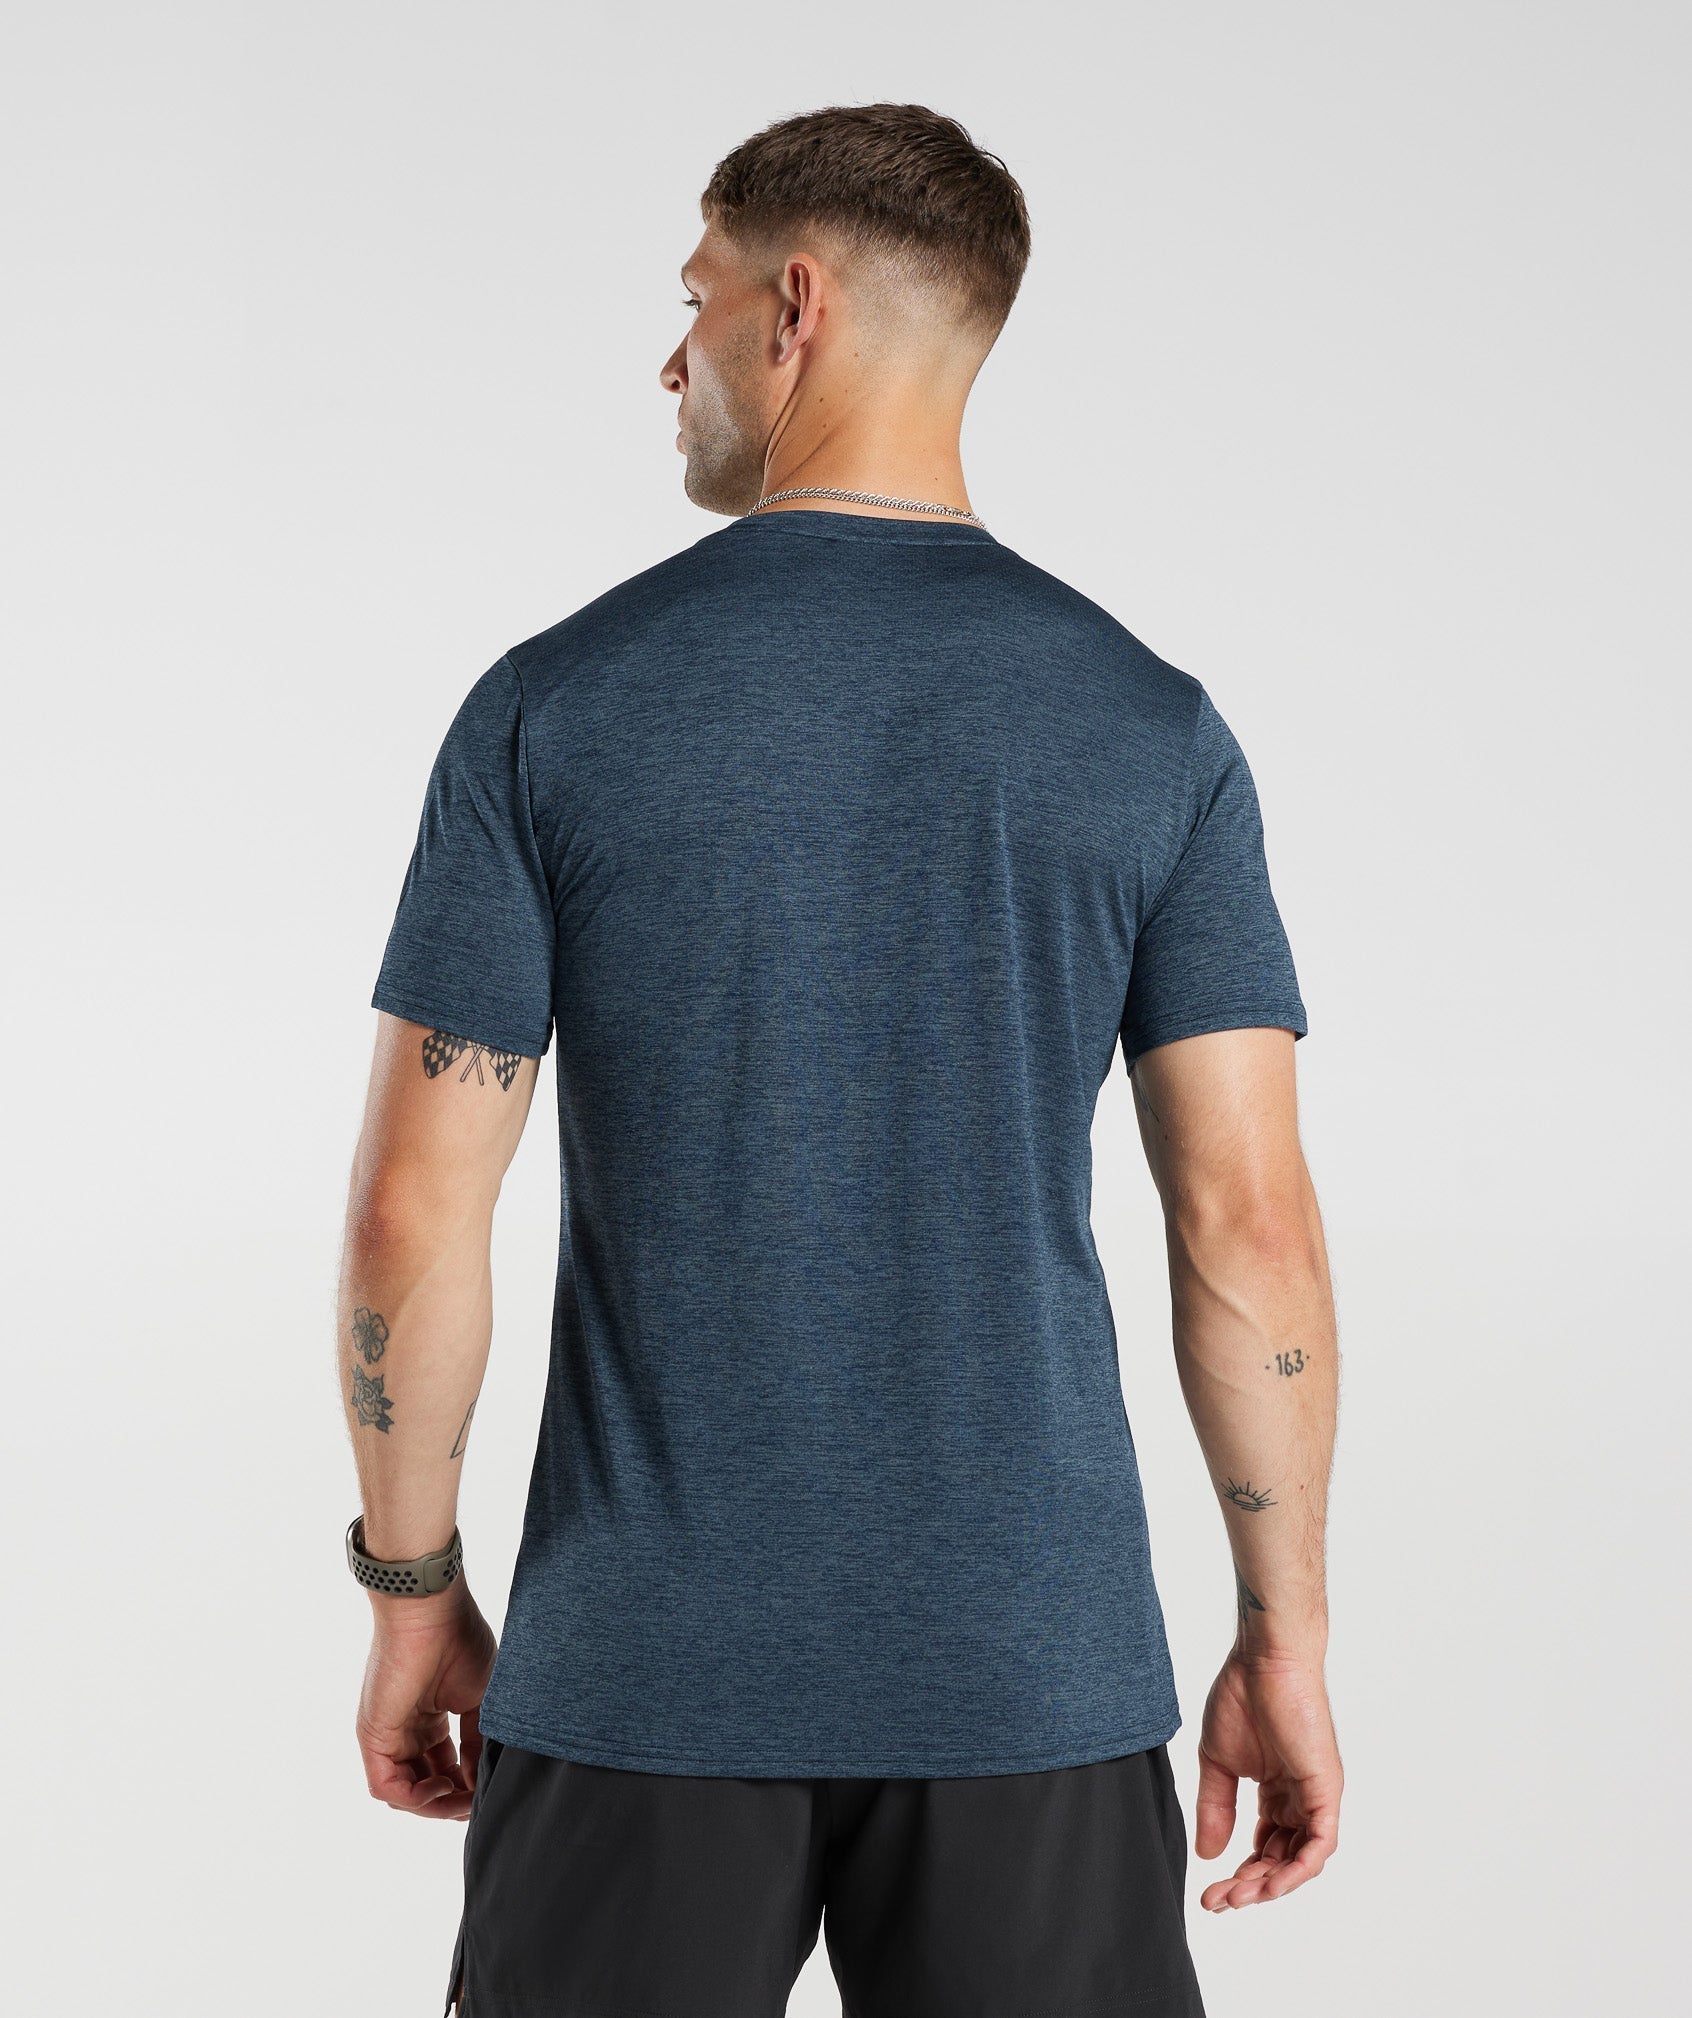 Arrival Marl T-Shirt in Navy/Smokey Teal Marl - view 2